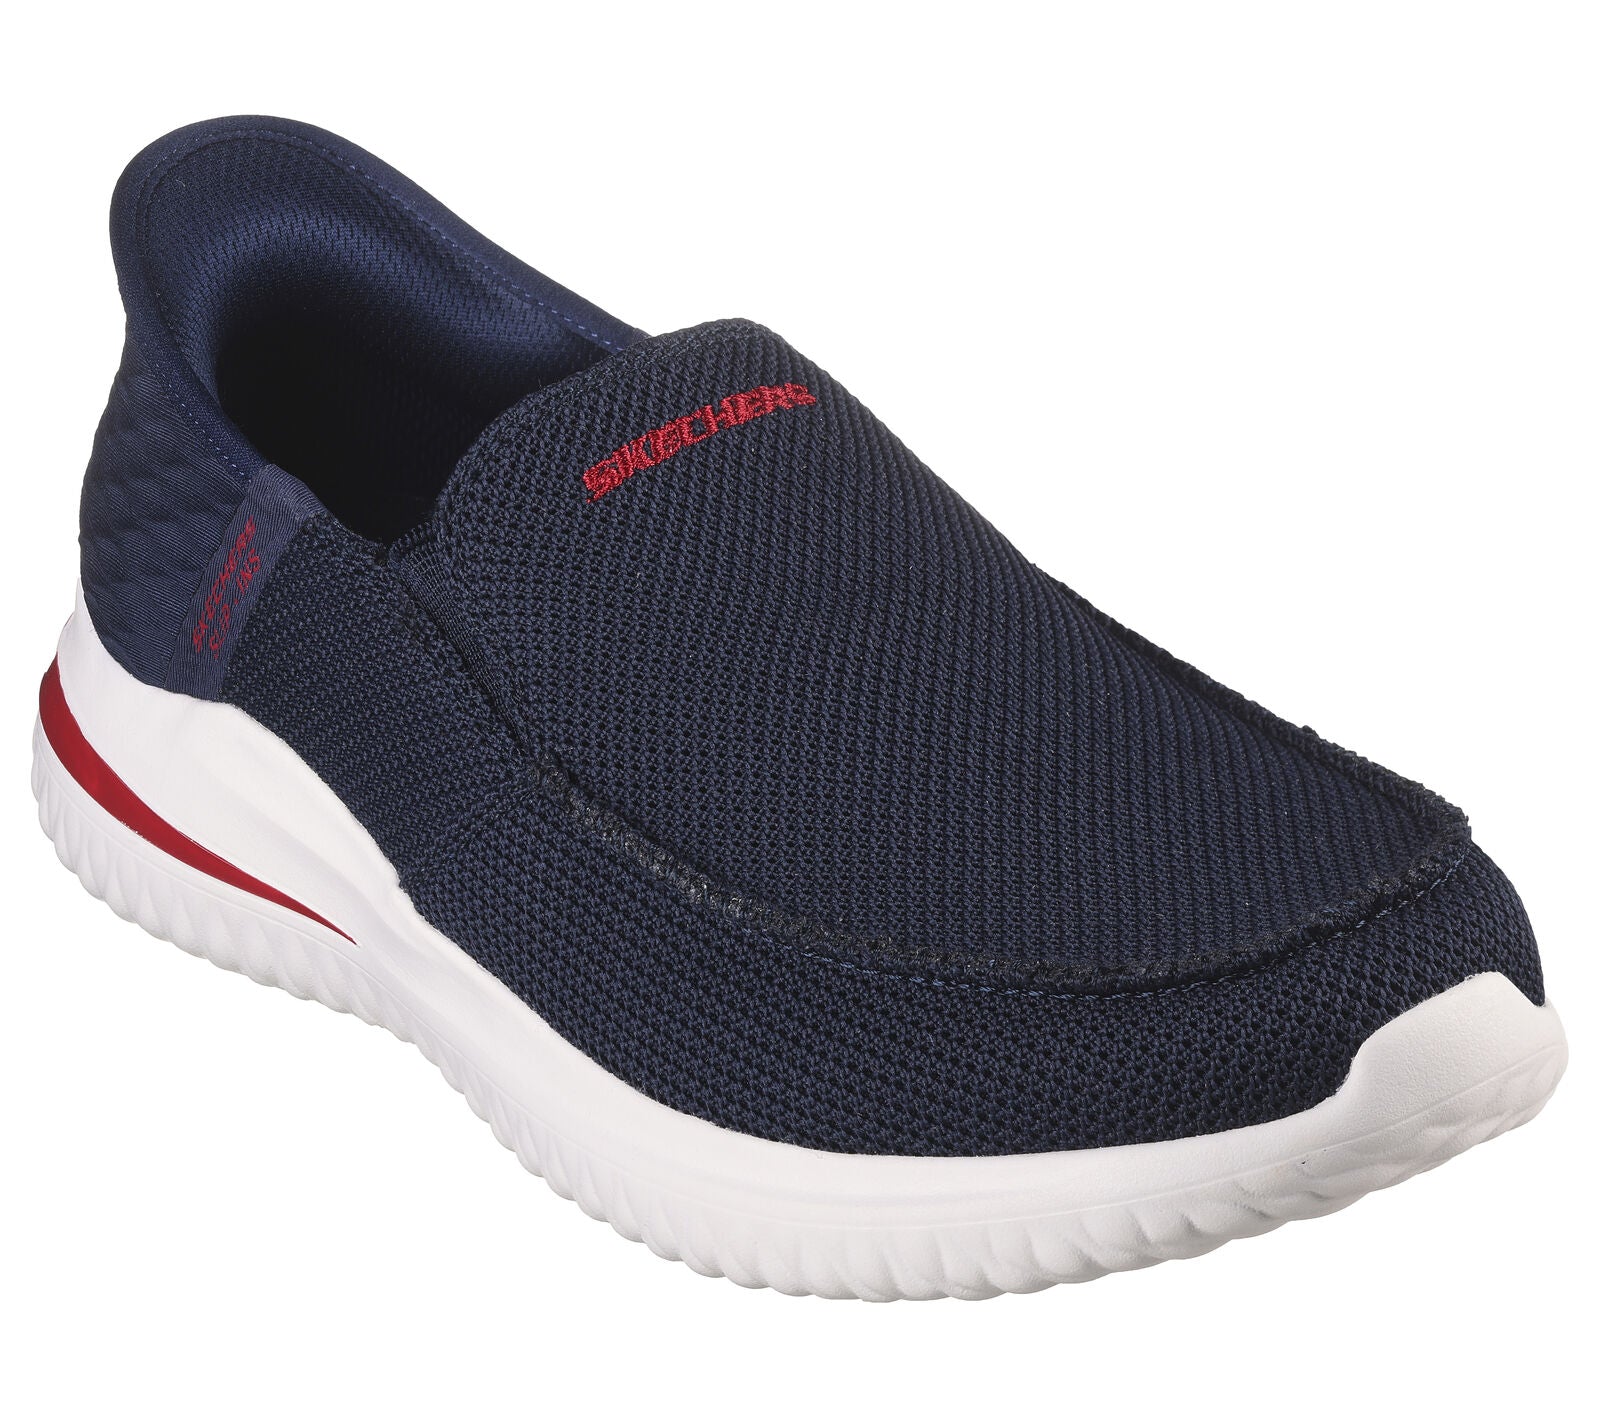 Skechers 210604 Delson 3.0 Cabrino Mens Navy Blue Textile Vegan Arch Support Slip On Trainers